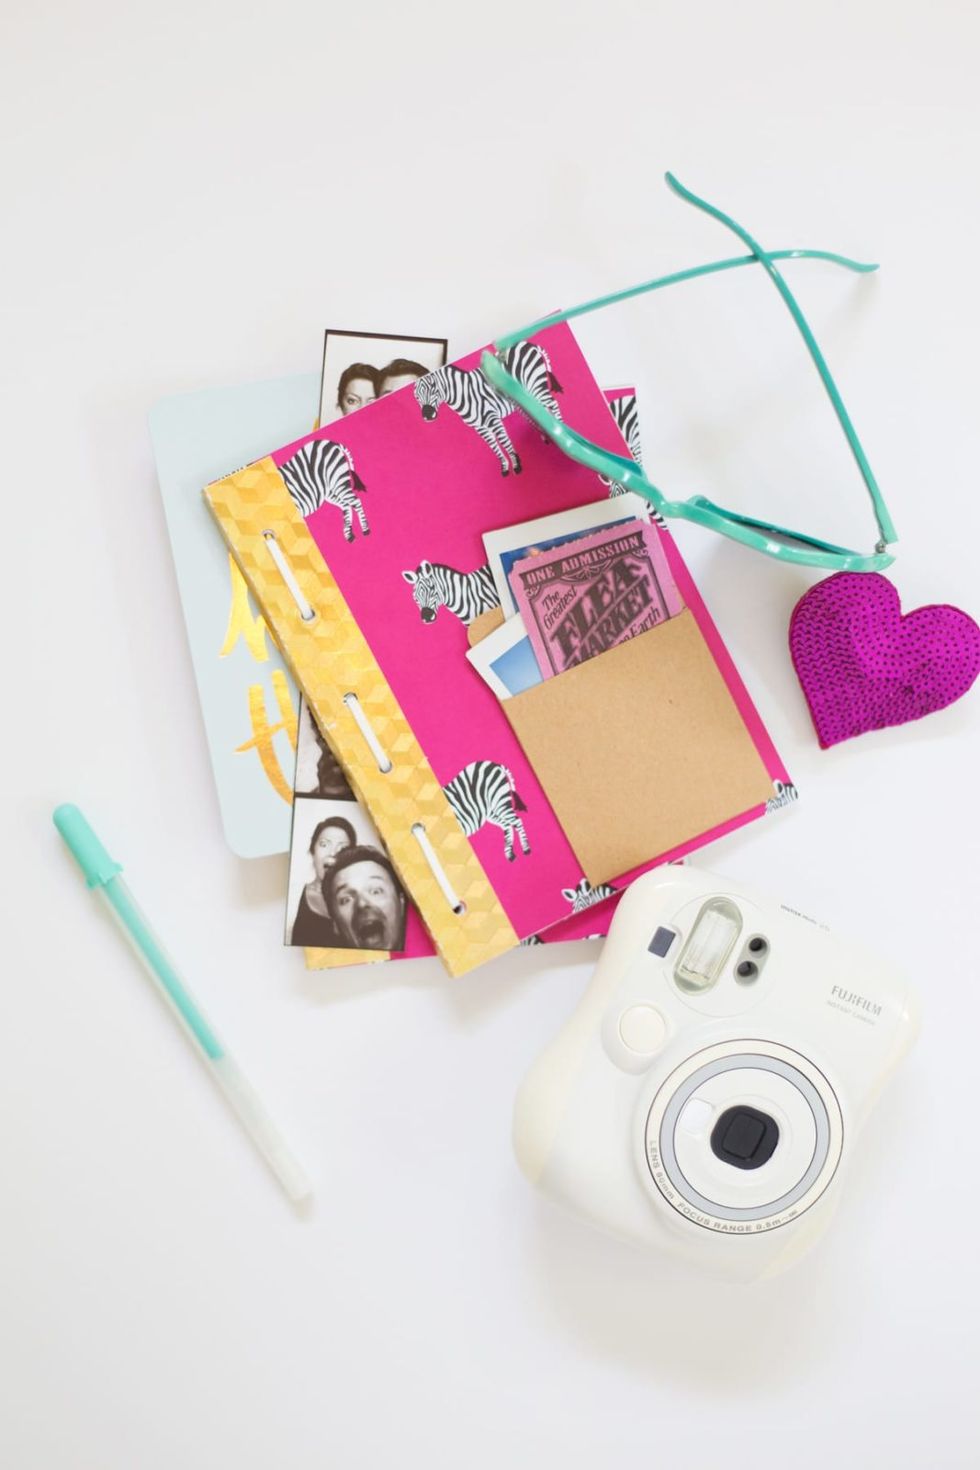 5 Simple and Easy Scrapbooking Ideas! - A Beautiful Mess